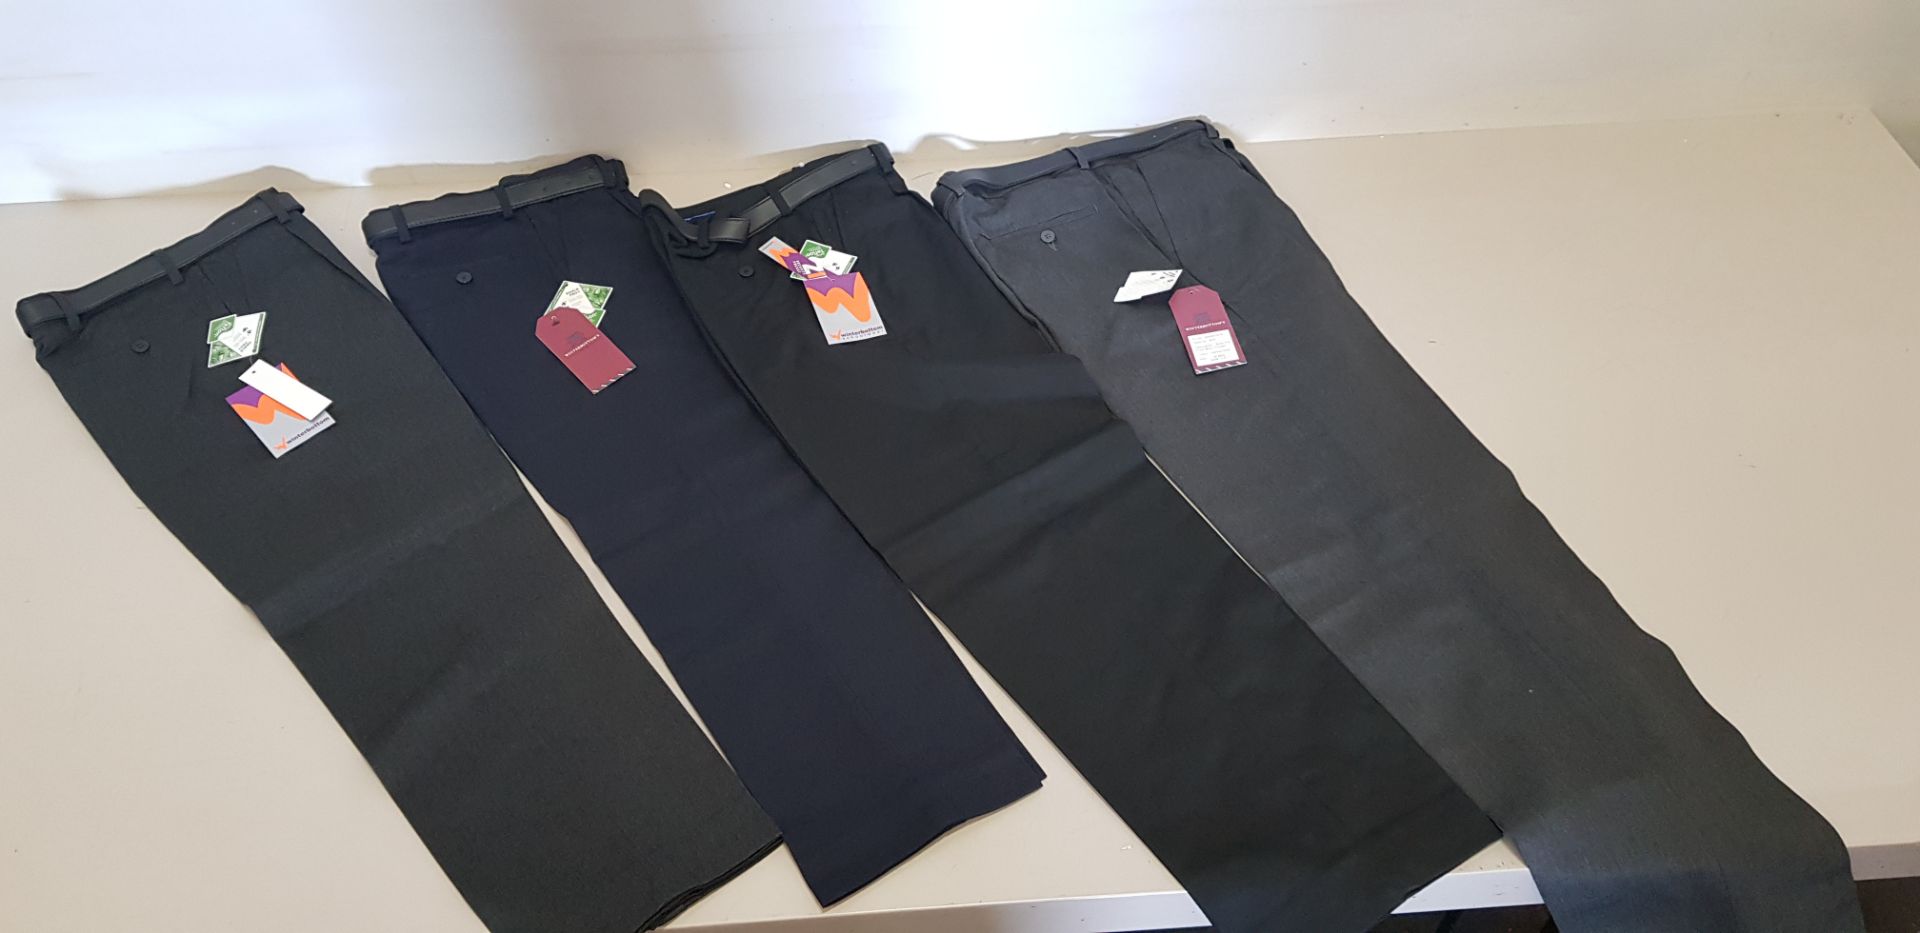 100 + BRAND NEW WINTERBOTTOMS TROUSERS IN GREY, BLACK, CHARCOAL IN VARIOUS SIZES